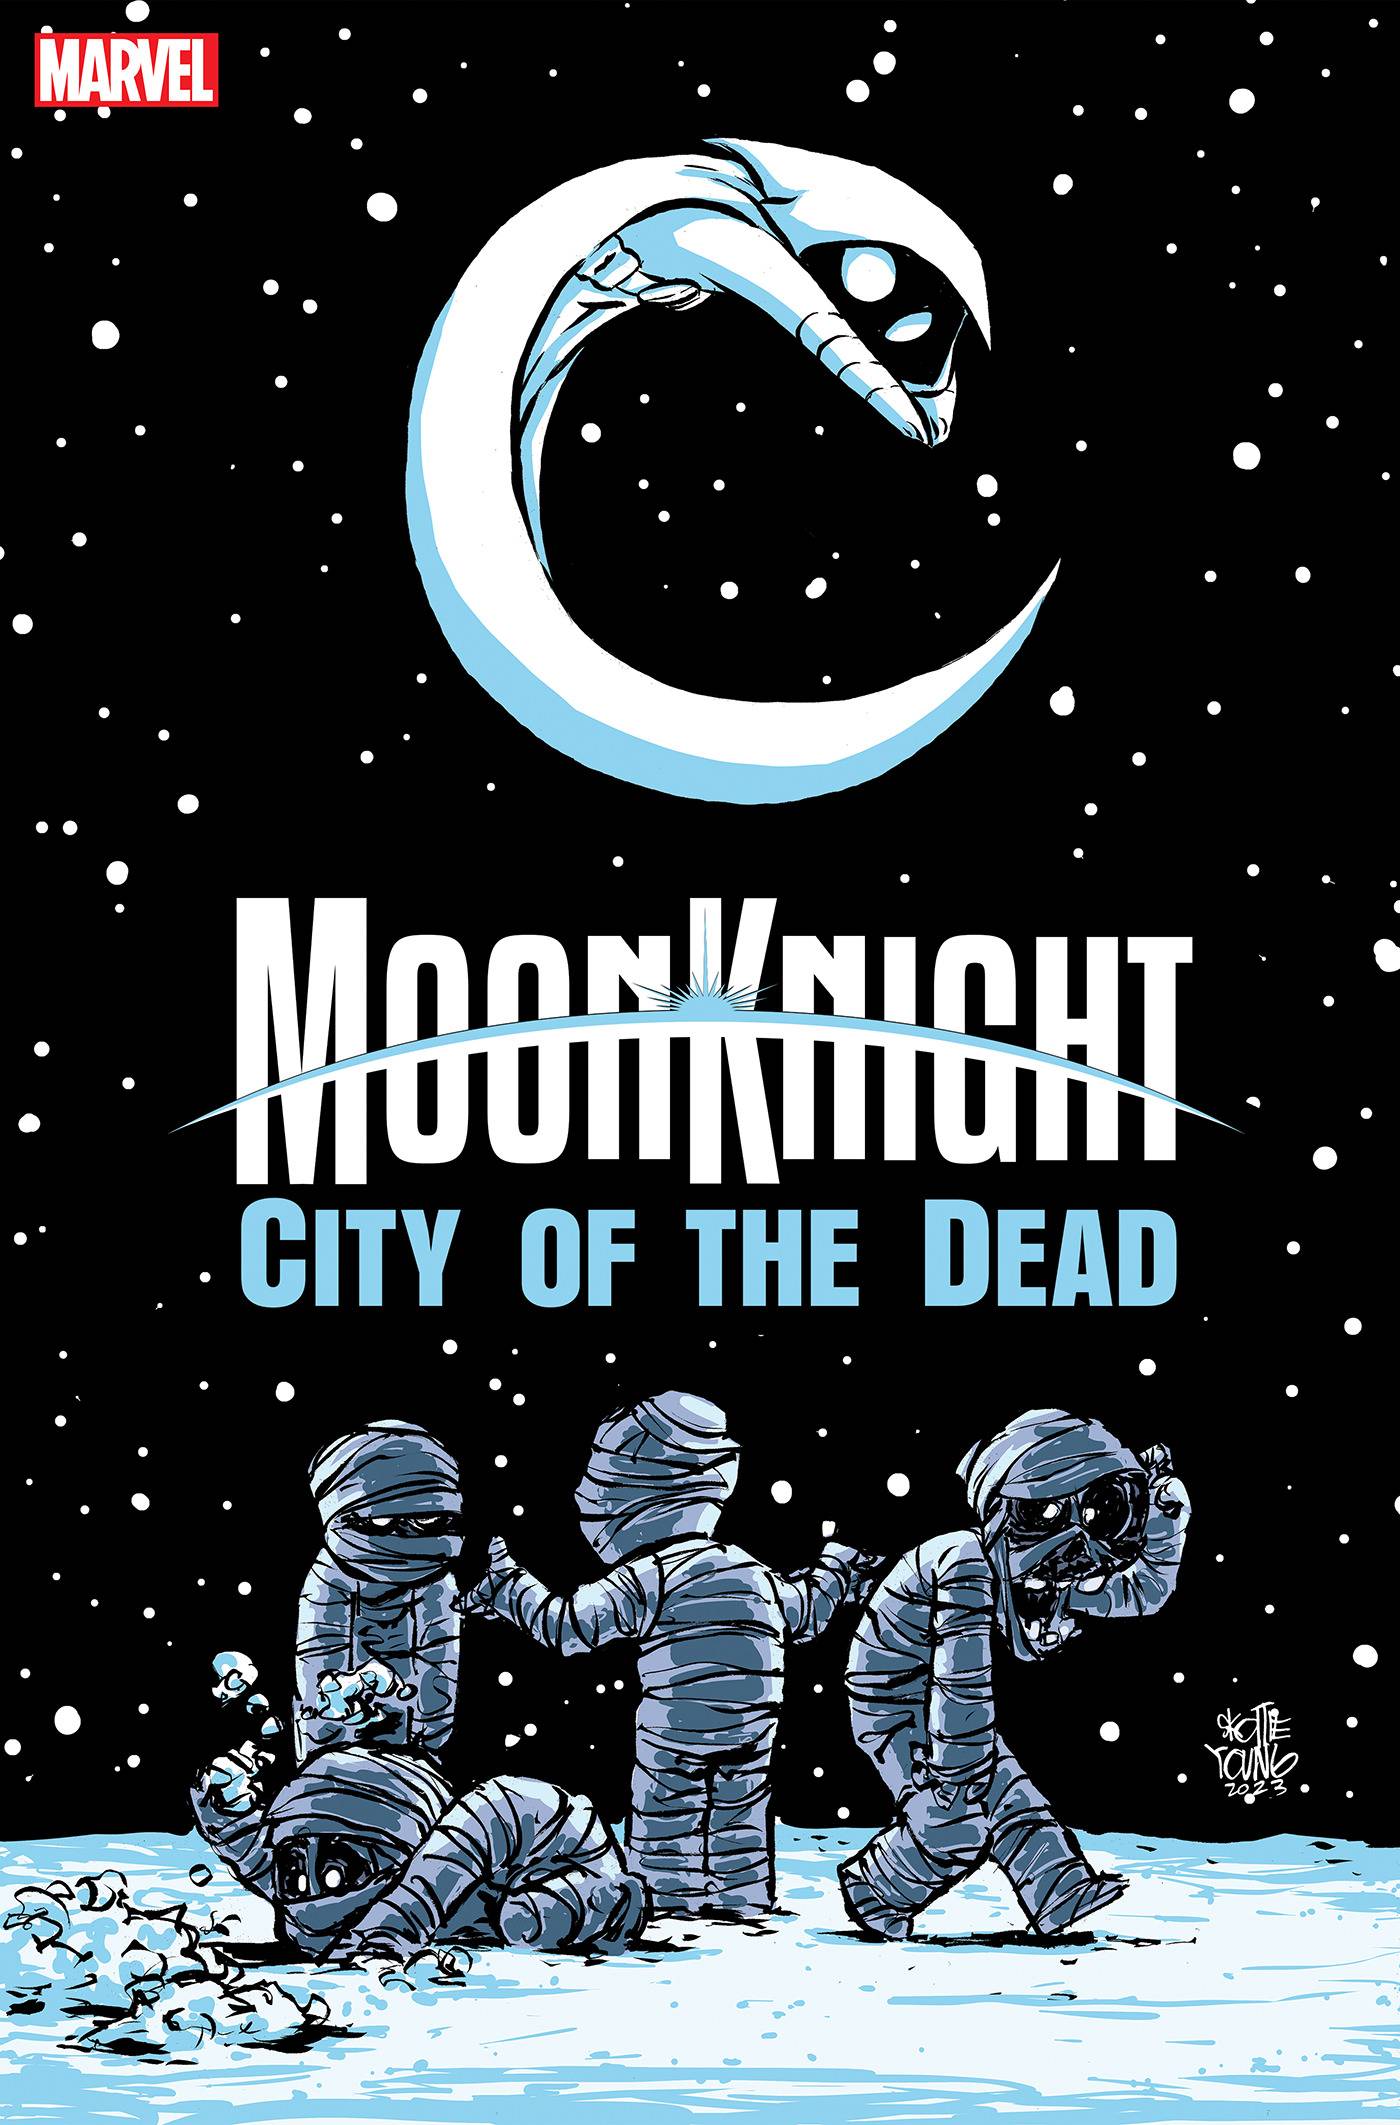 MOON KNIGHT CITY OF THE DEAD #1 (OF 5) SKOTTIE YOUNG VAR